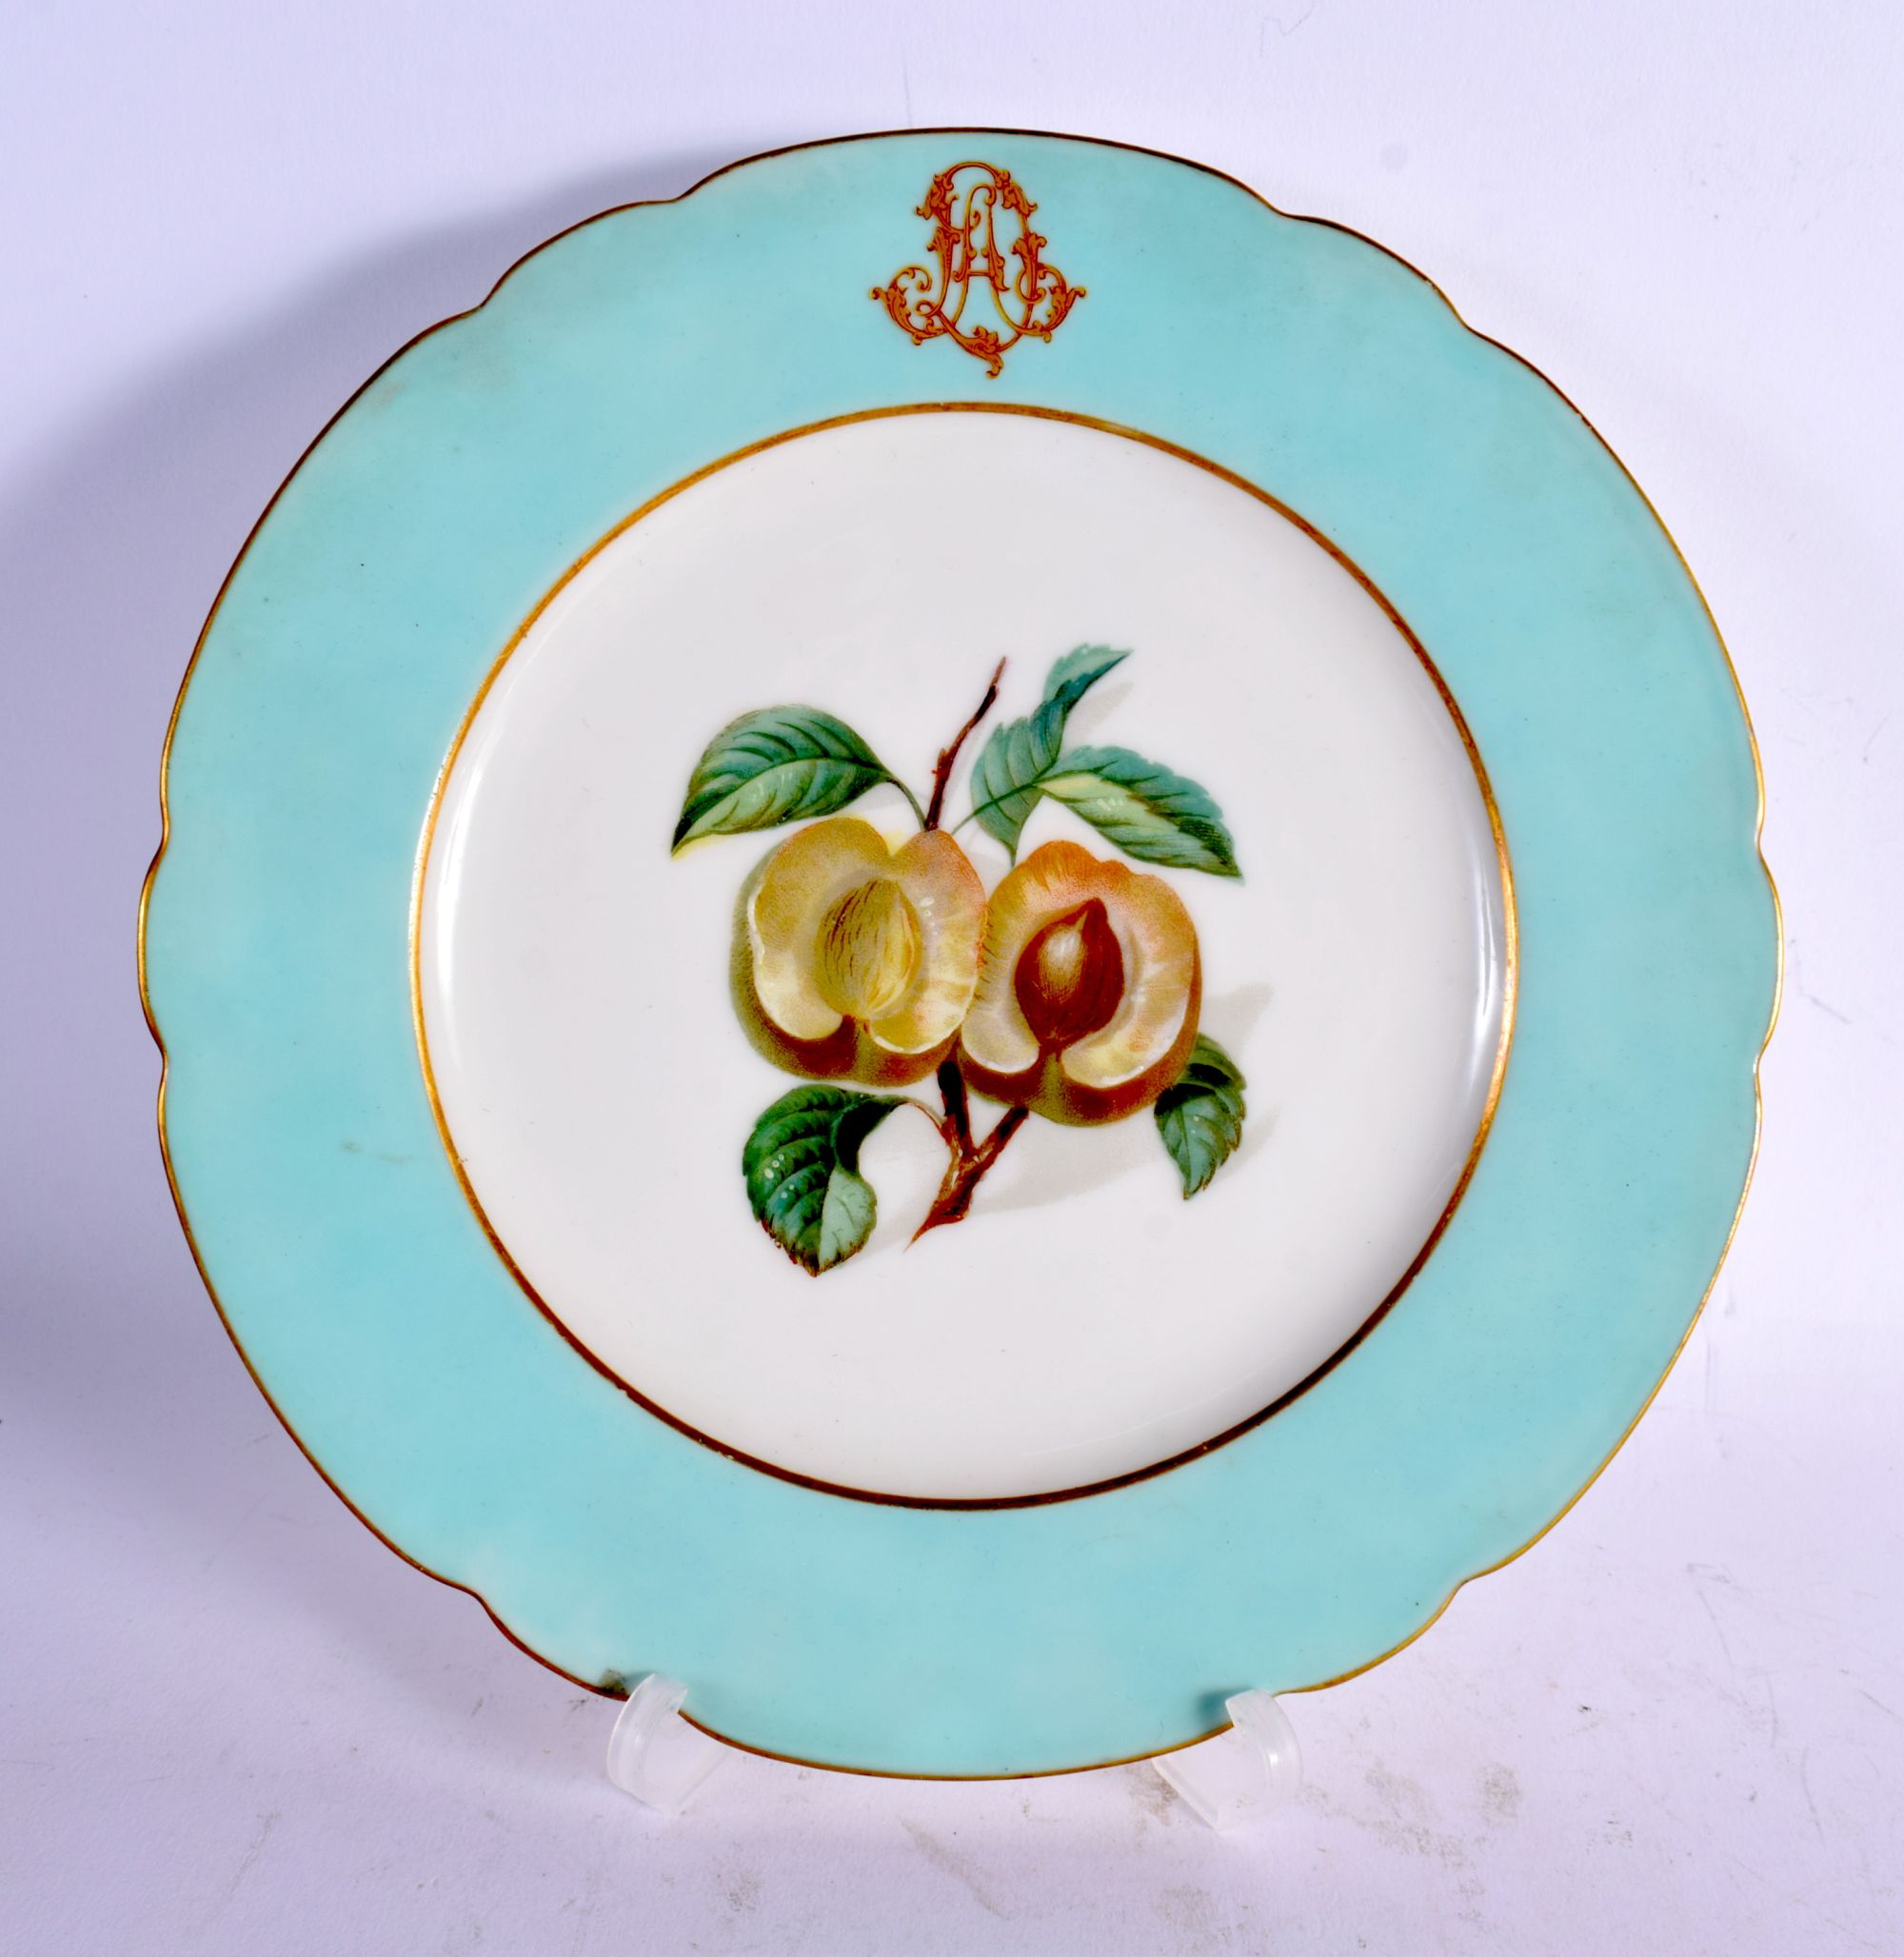 A LARGE AND EXTENSIVE LATE 19TH CENTURY FRENCH PORCELAIN DINNER SERVICE painted with a monogram. Lar - Image 8 of 14